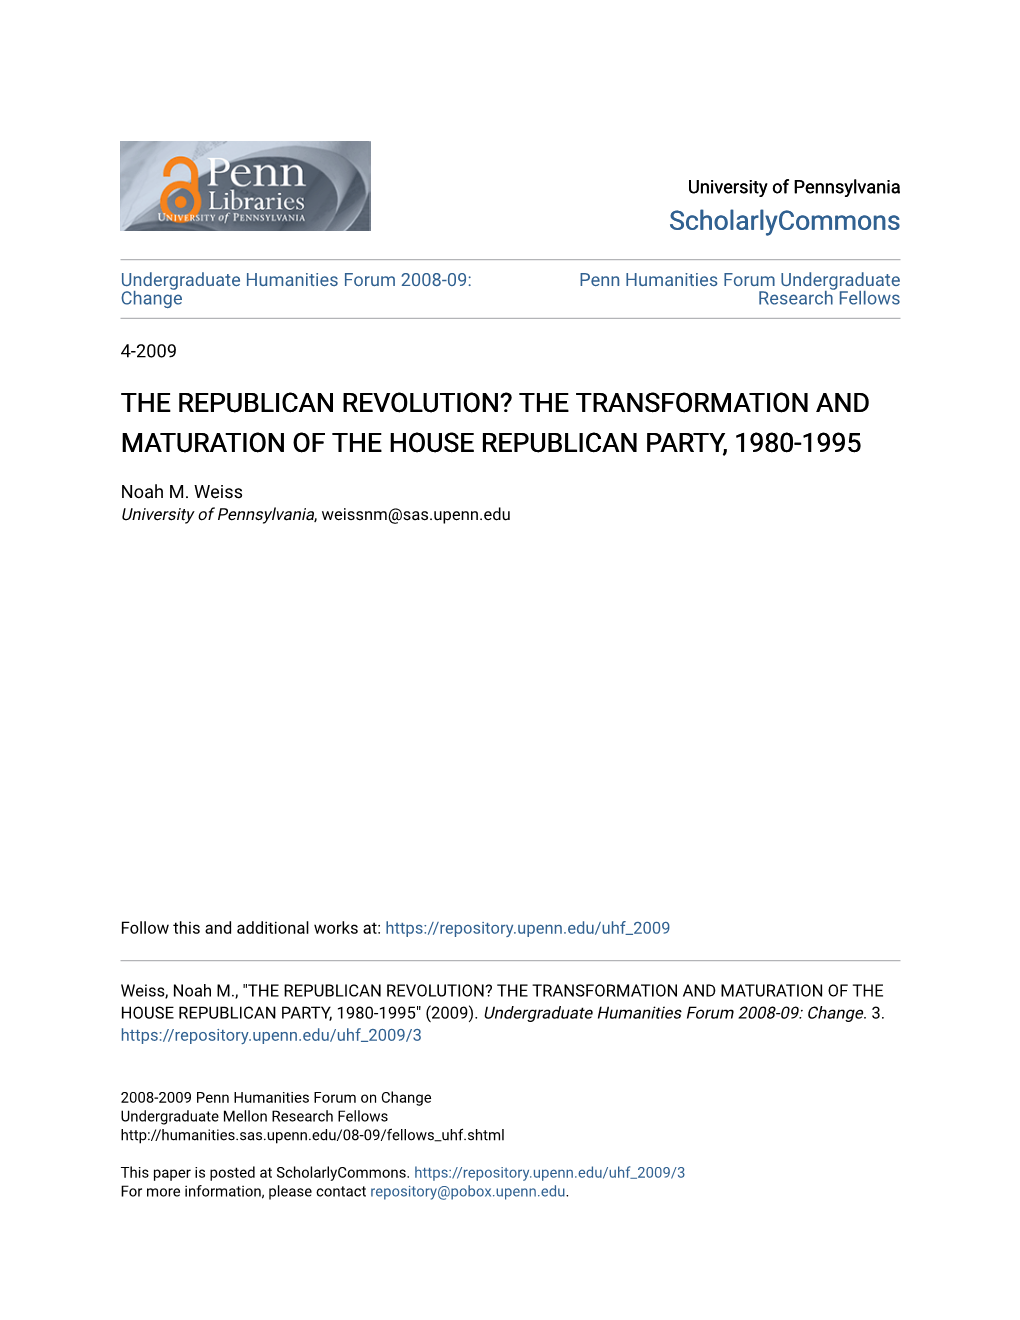 The Republican Revolution? the Transformation and Maturation of the House Republican Party, 1980-1995